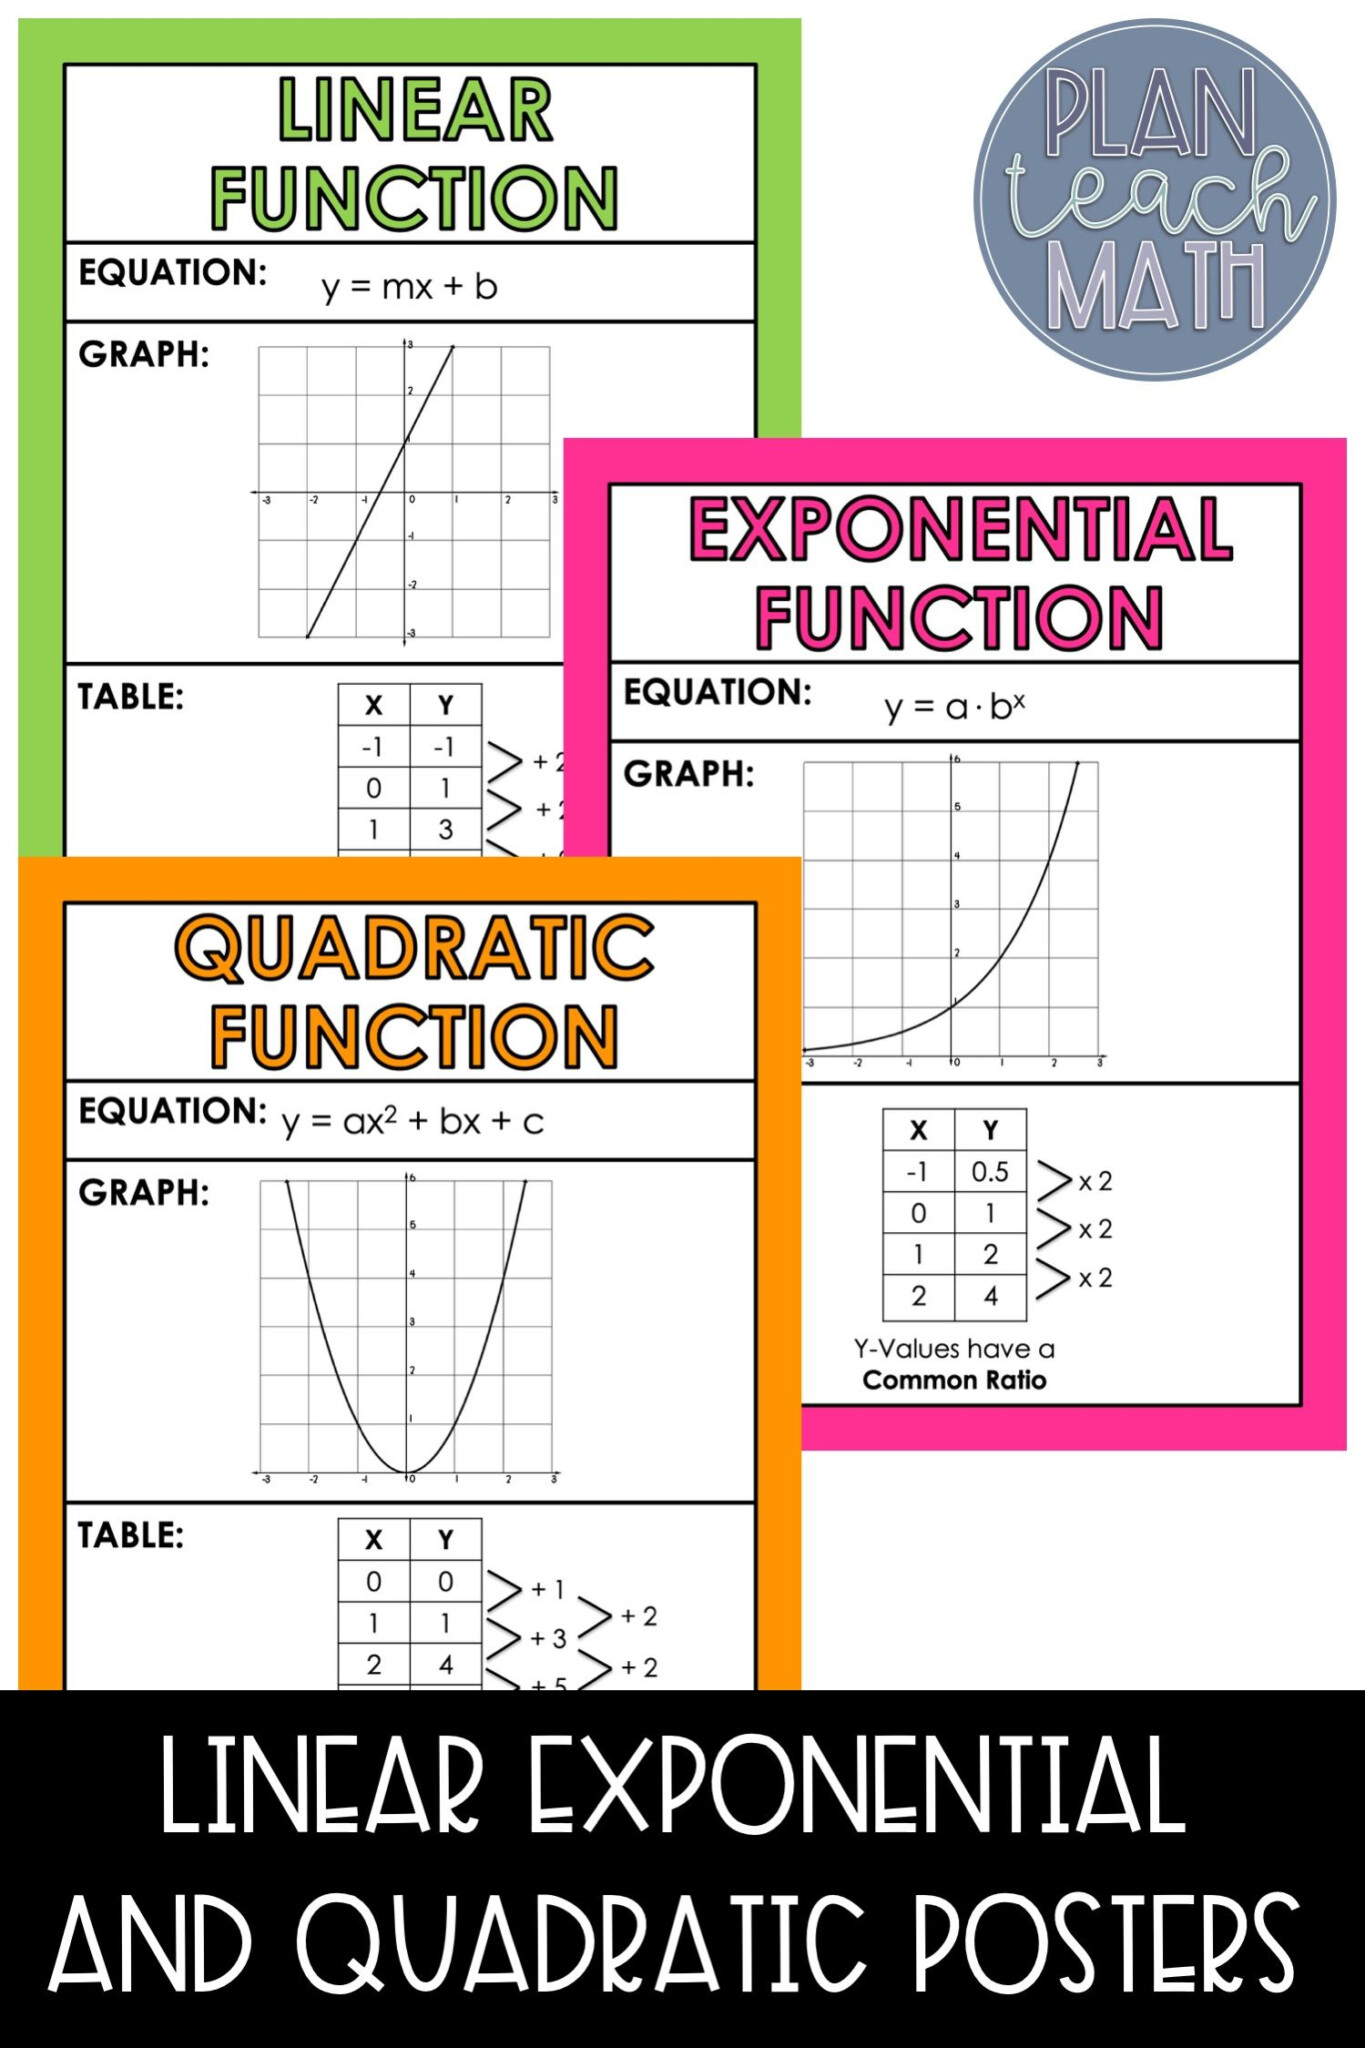 identifying-points-of-function-in-a-graph-function-worksheet-with-answers-printable-pdf-download